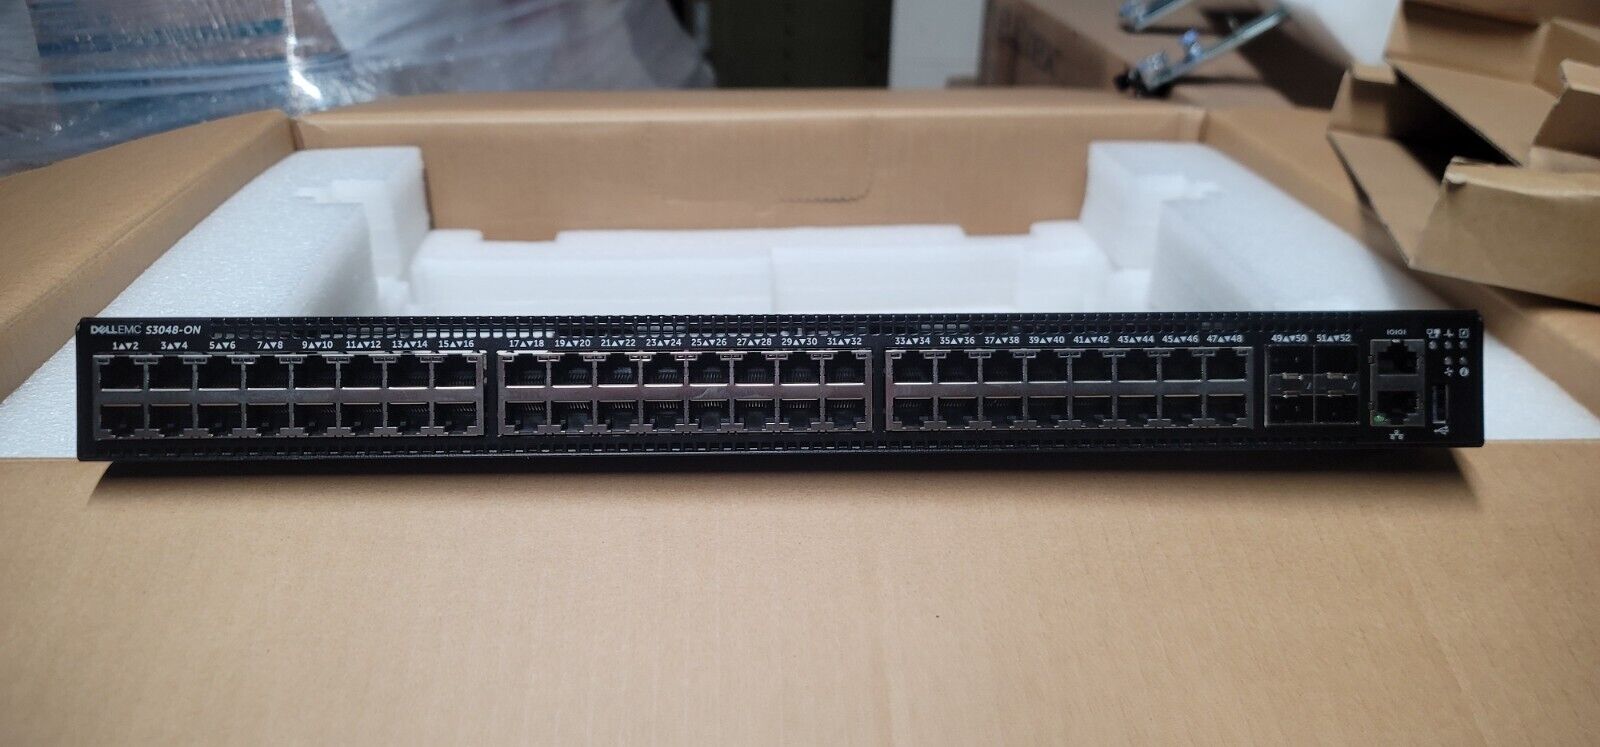 Dell EMC Power Switch S3048-ON 48 Port SFP+ Managed Ethernet Switch*QTY